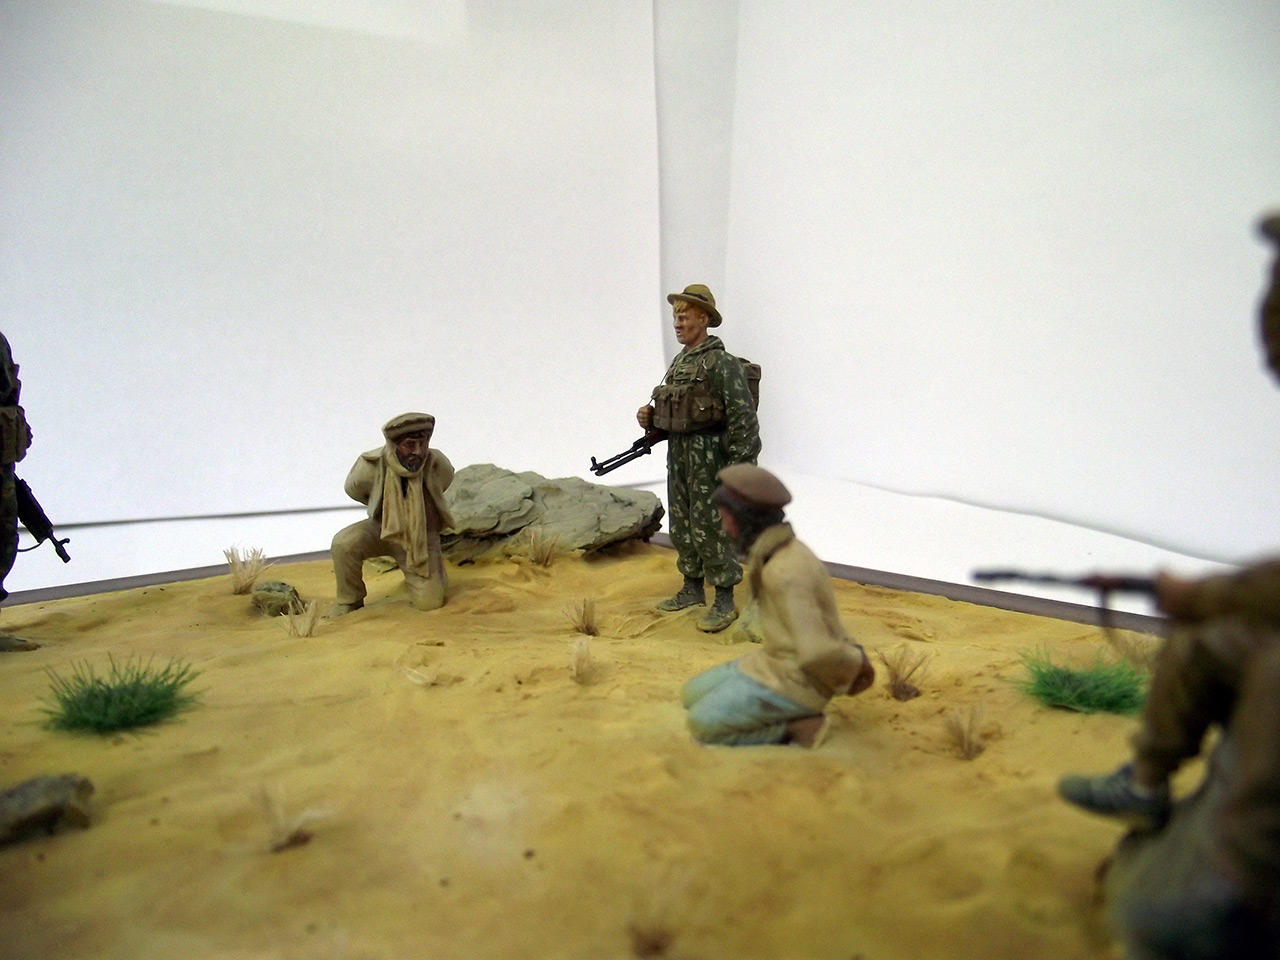 Dioramas and Vignettes: Ask the desert..., photo #14